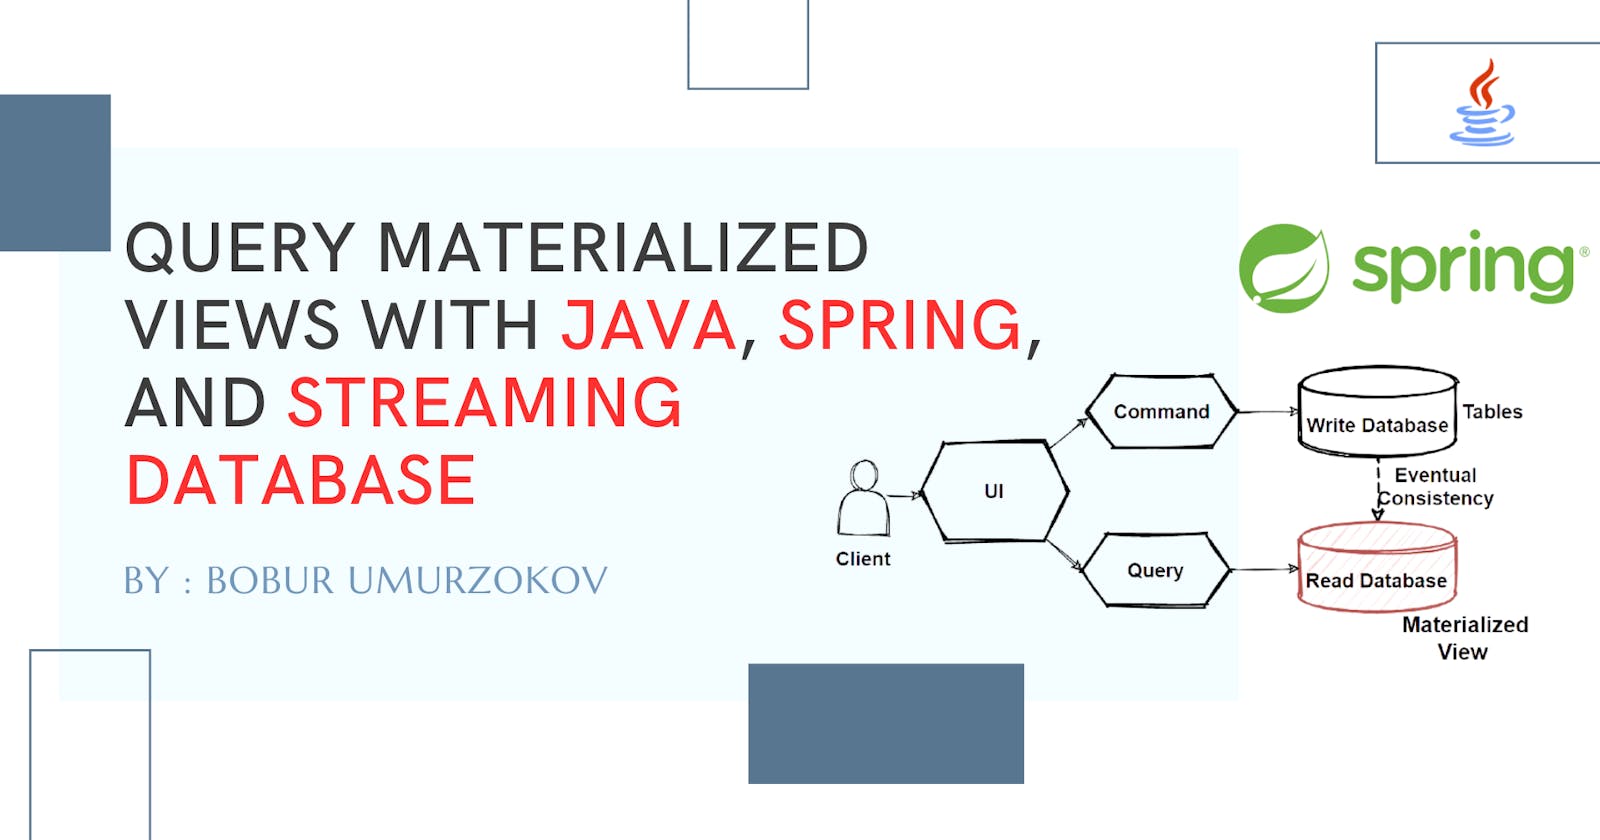 Query materialized views with Java, Spring, and streaming database